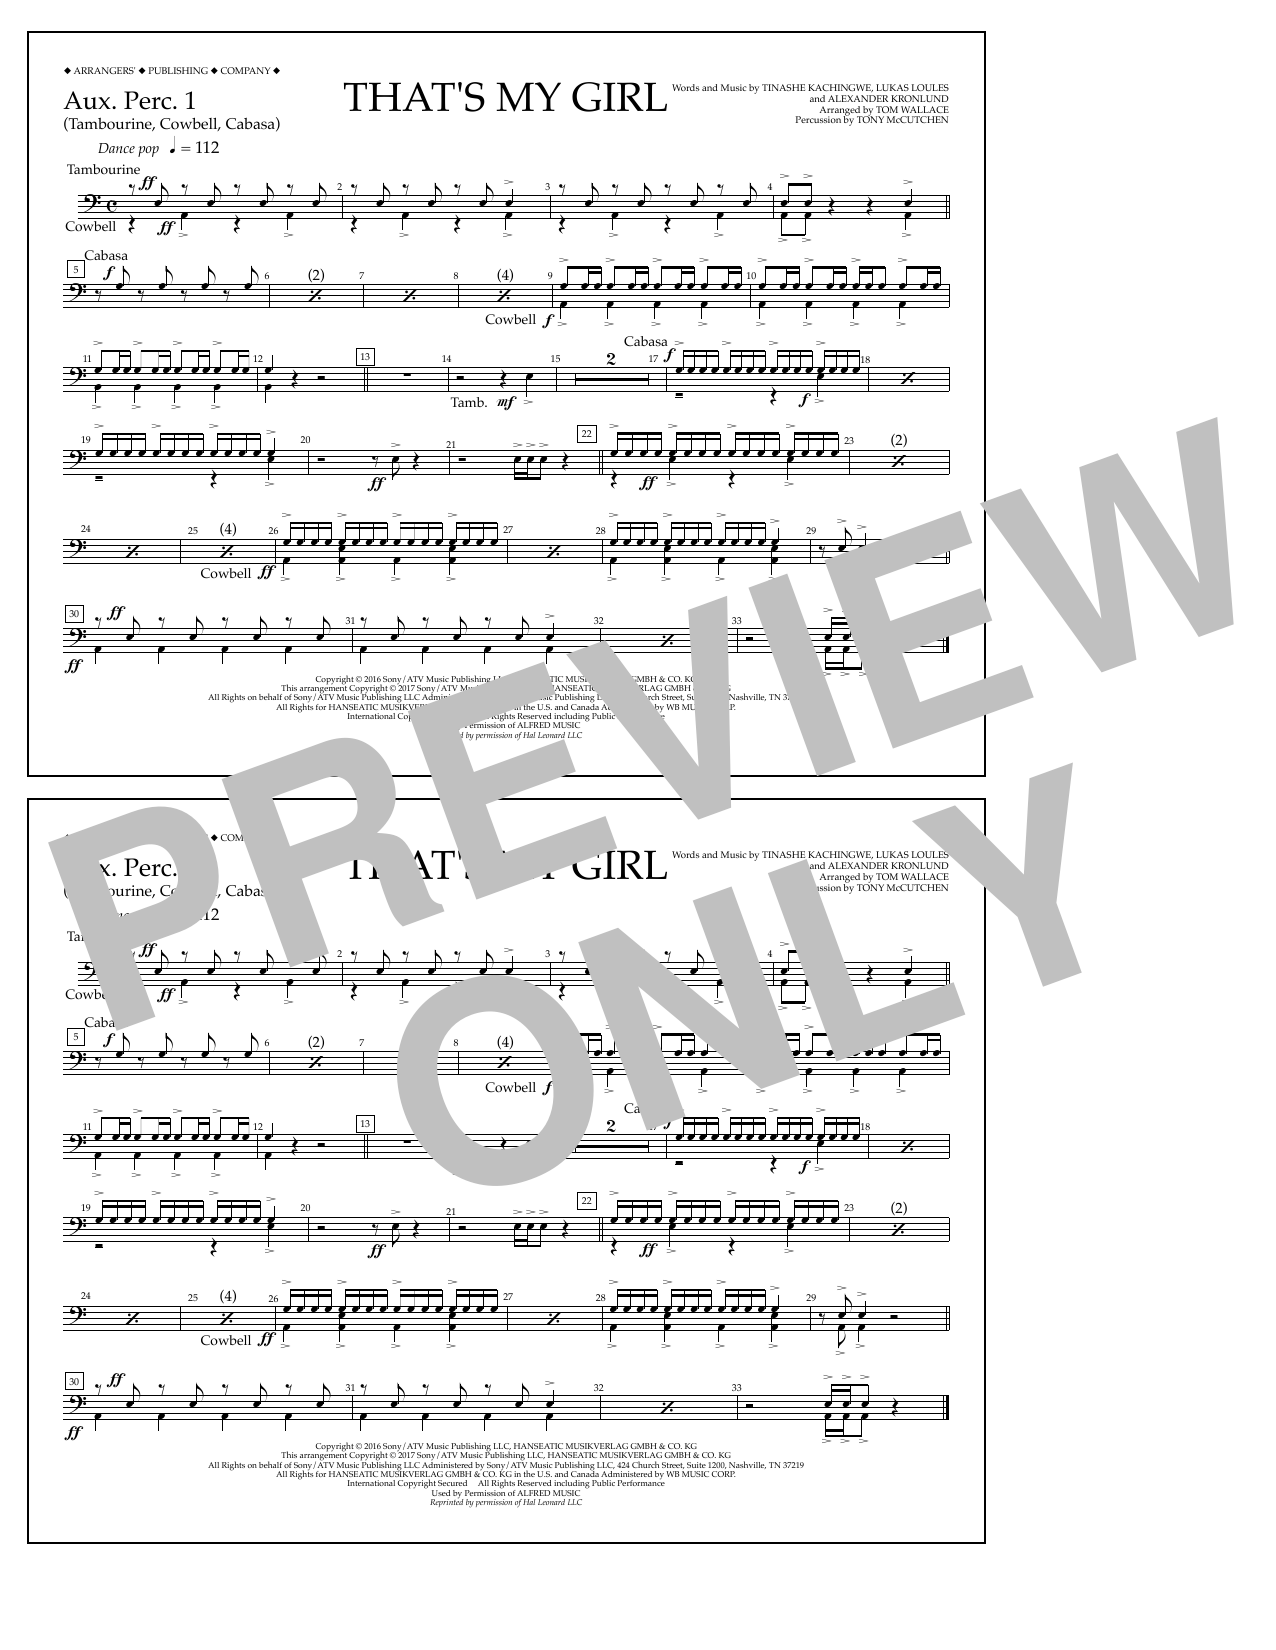 Download Tom Wallace That's My Girl - Aux. Perc. 1 Sheet Music